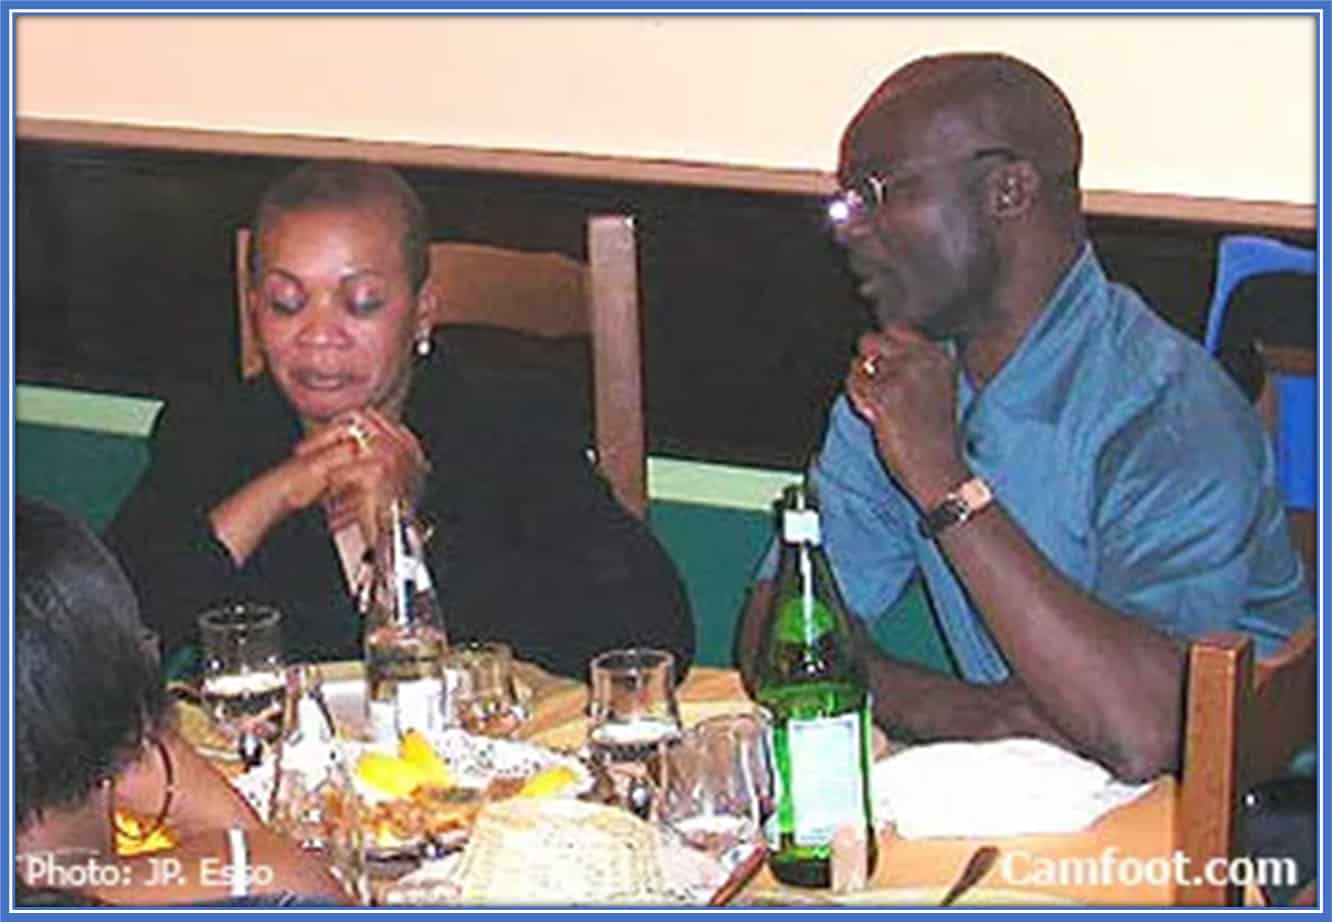 This is Evelyne and her husband (Roger Milla) before her death.